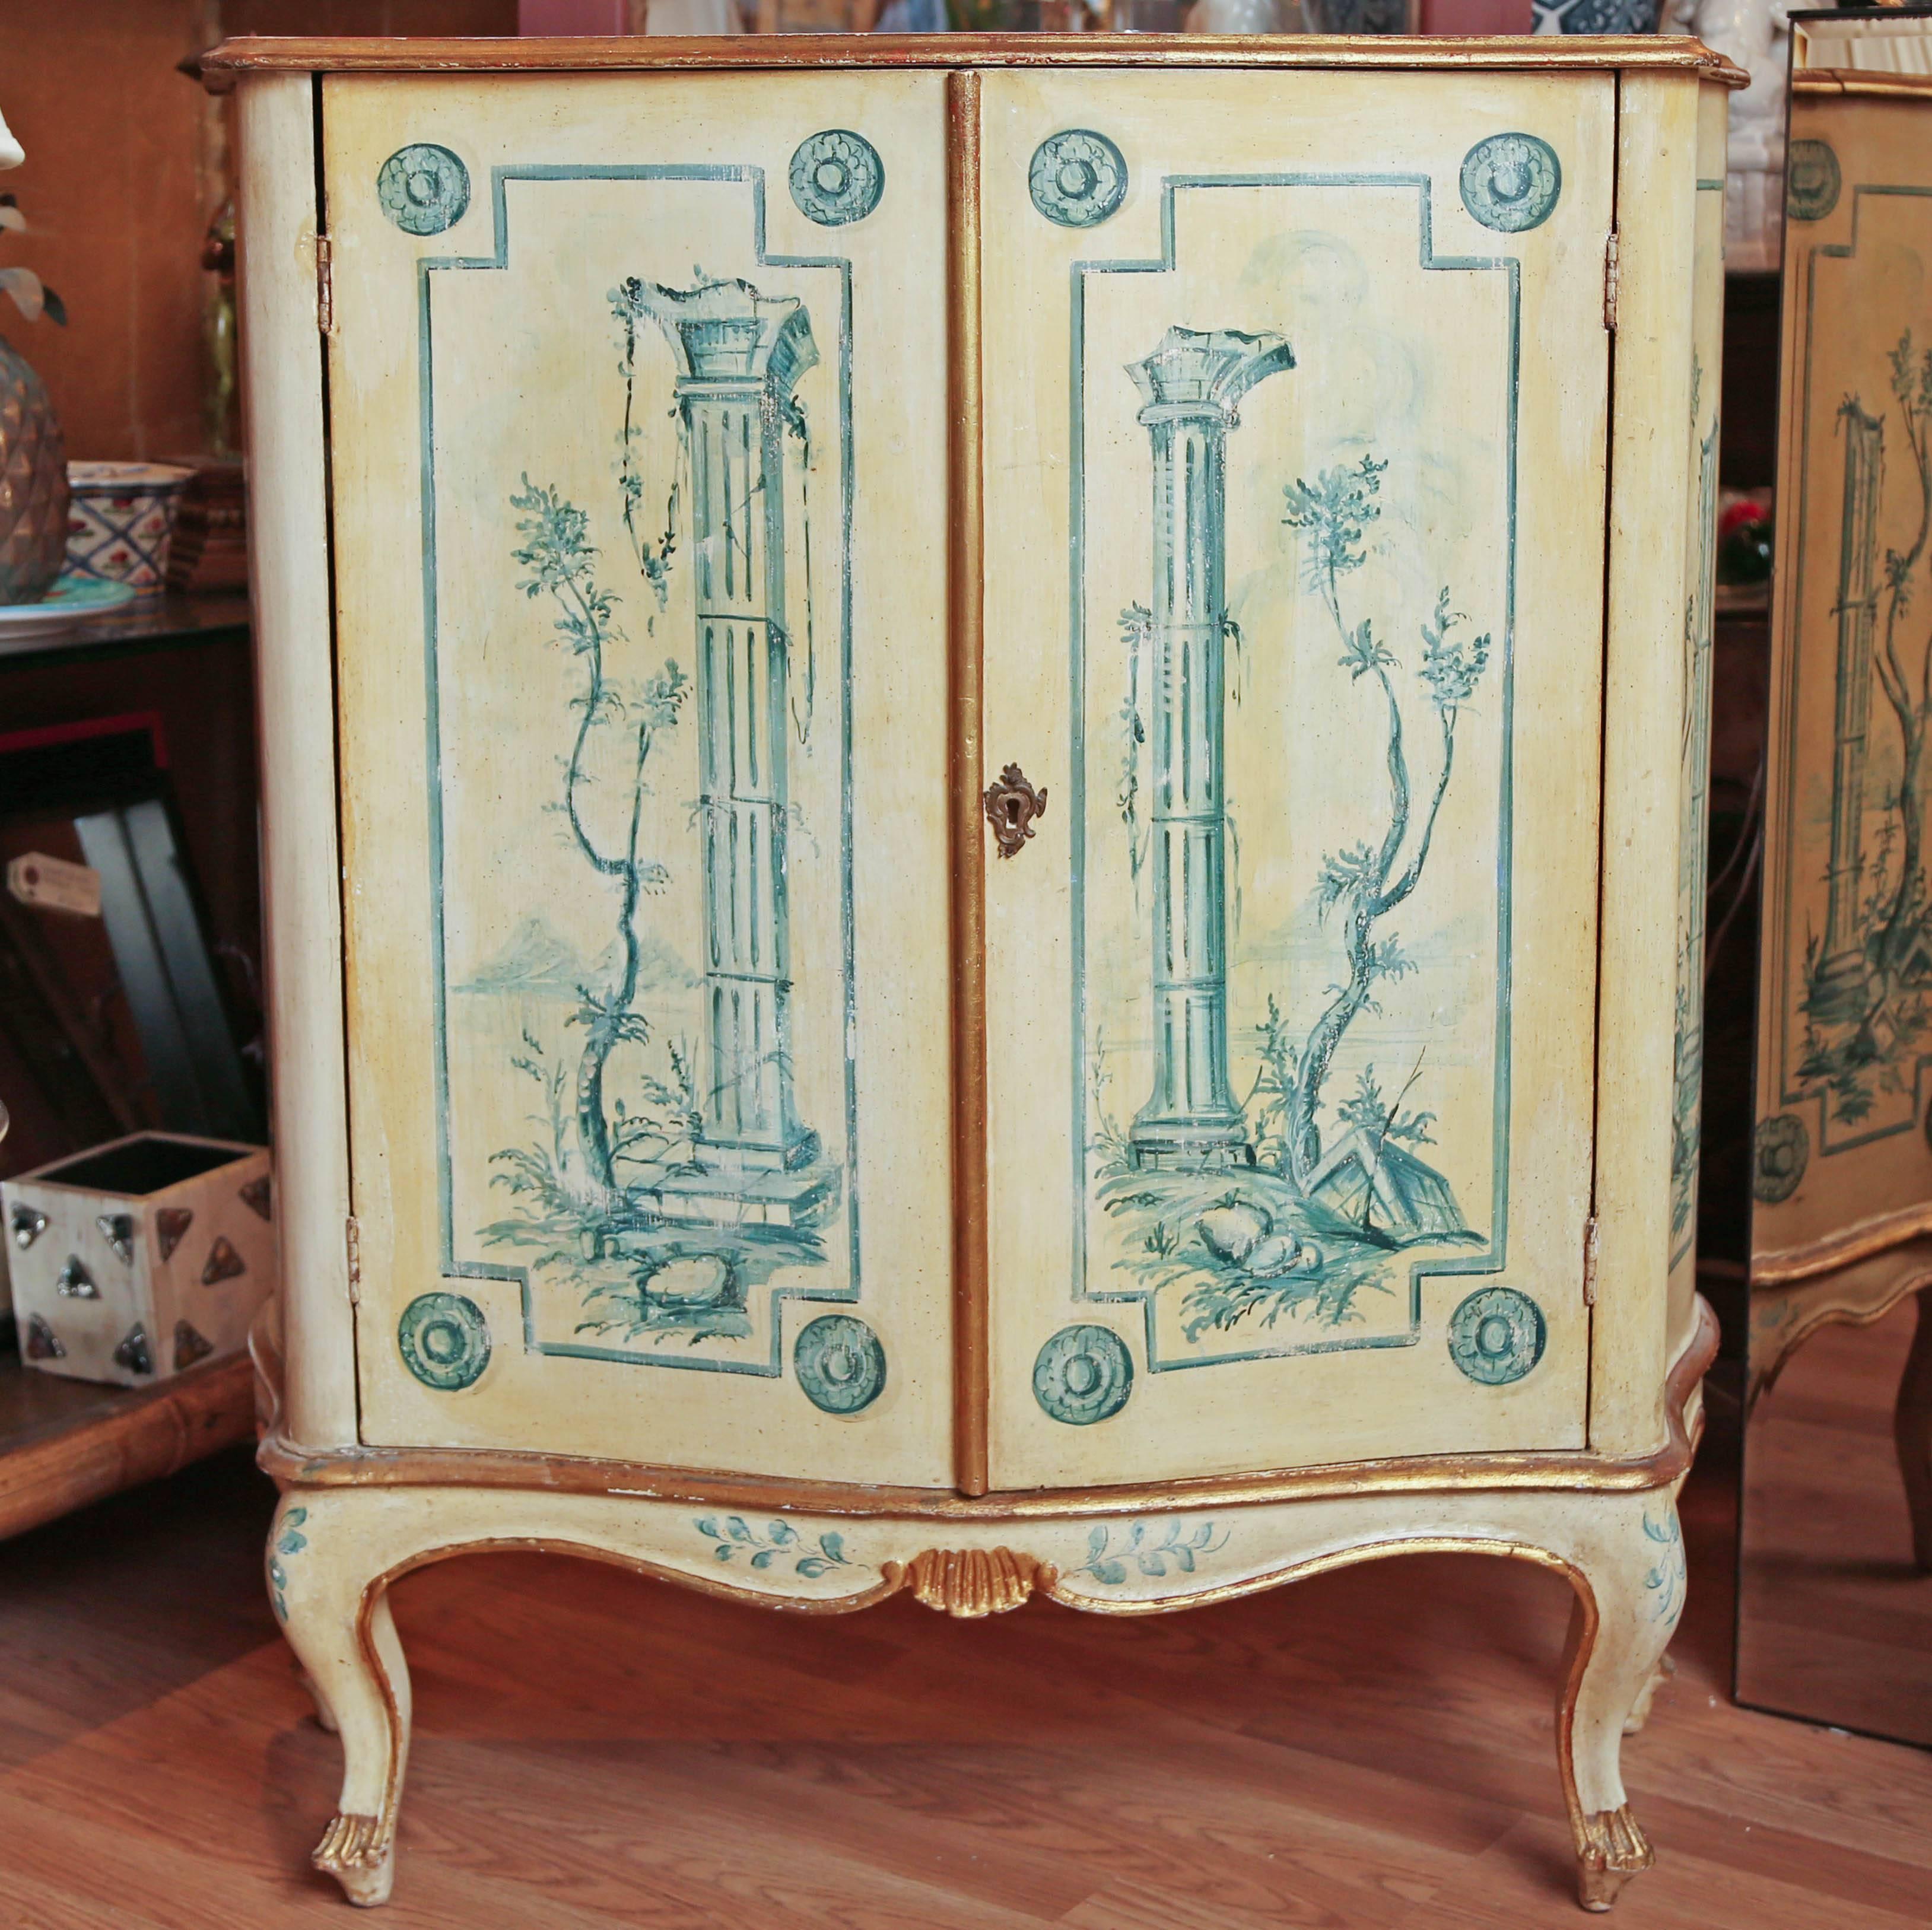 Vintage Italian hand-painted cream and blue two-door bar cabinet. Top lifts up to reveal additional storage.